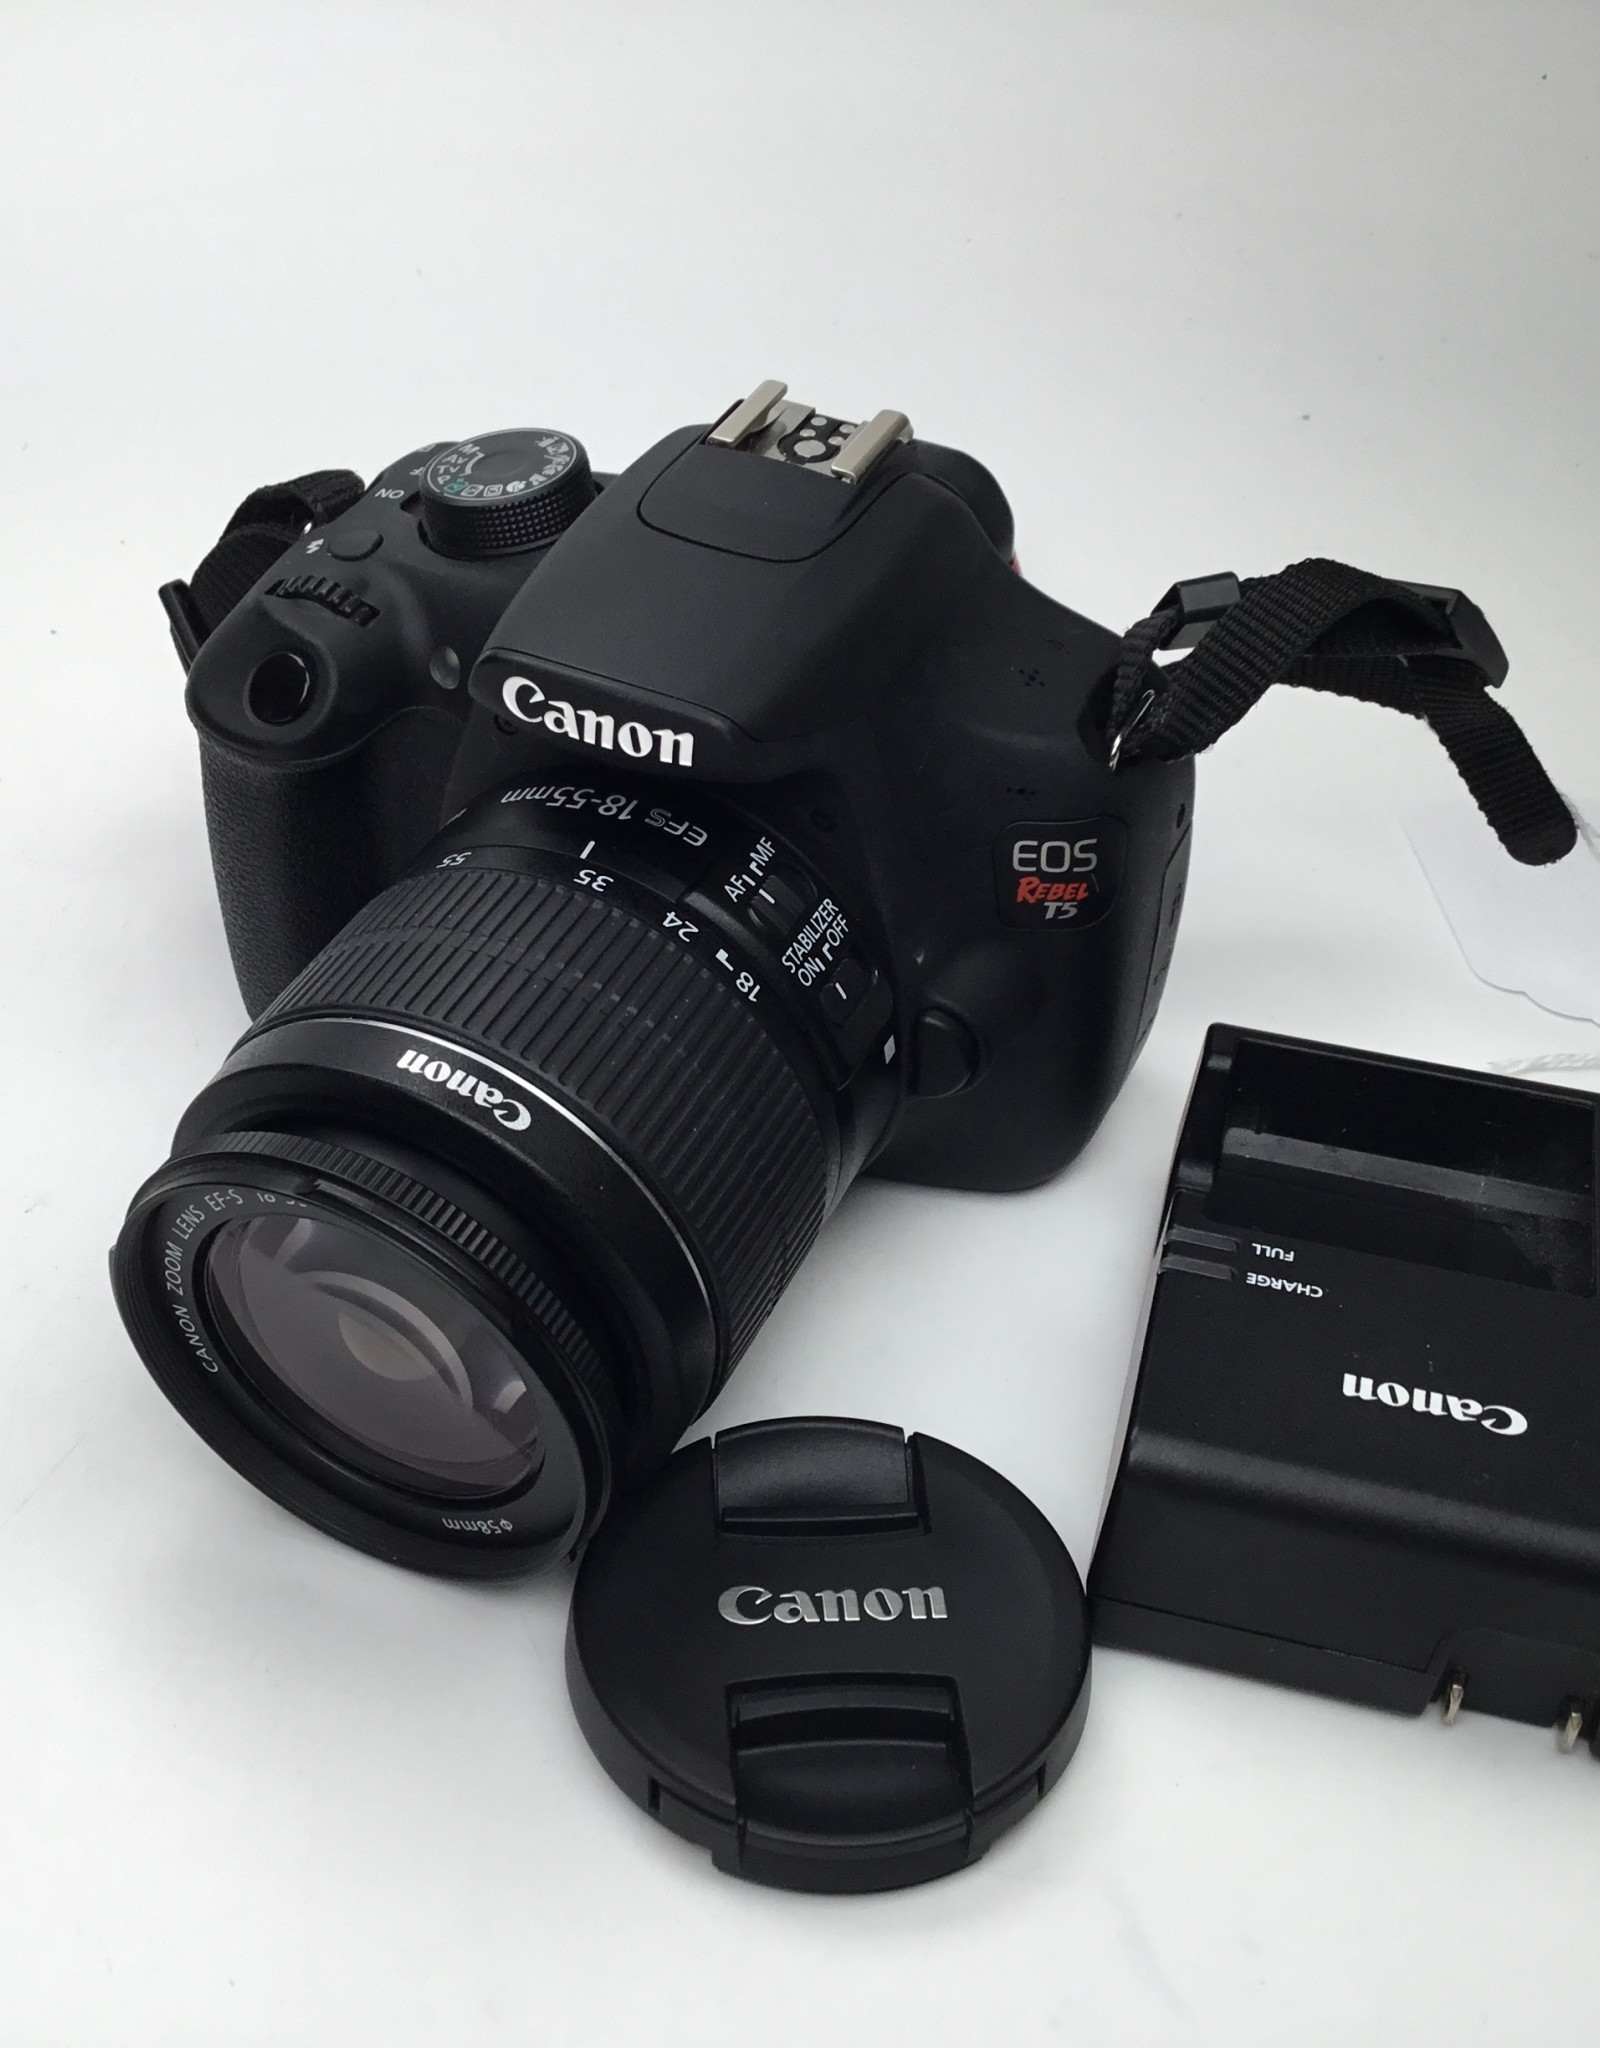 CANON Canon Rebel T5 Camera w/ 18-55mm IS II Used Good